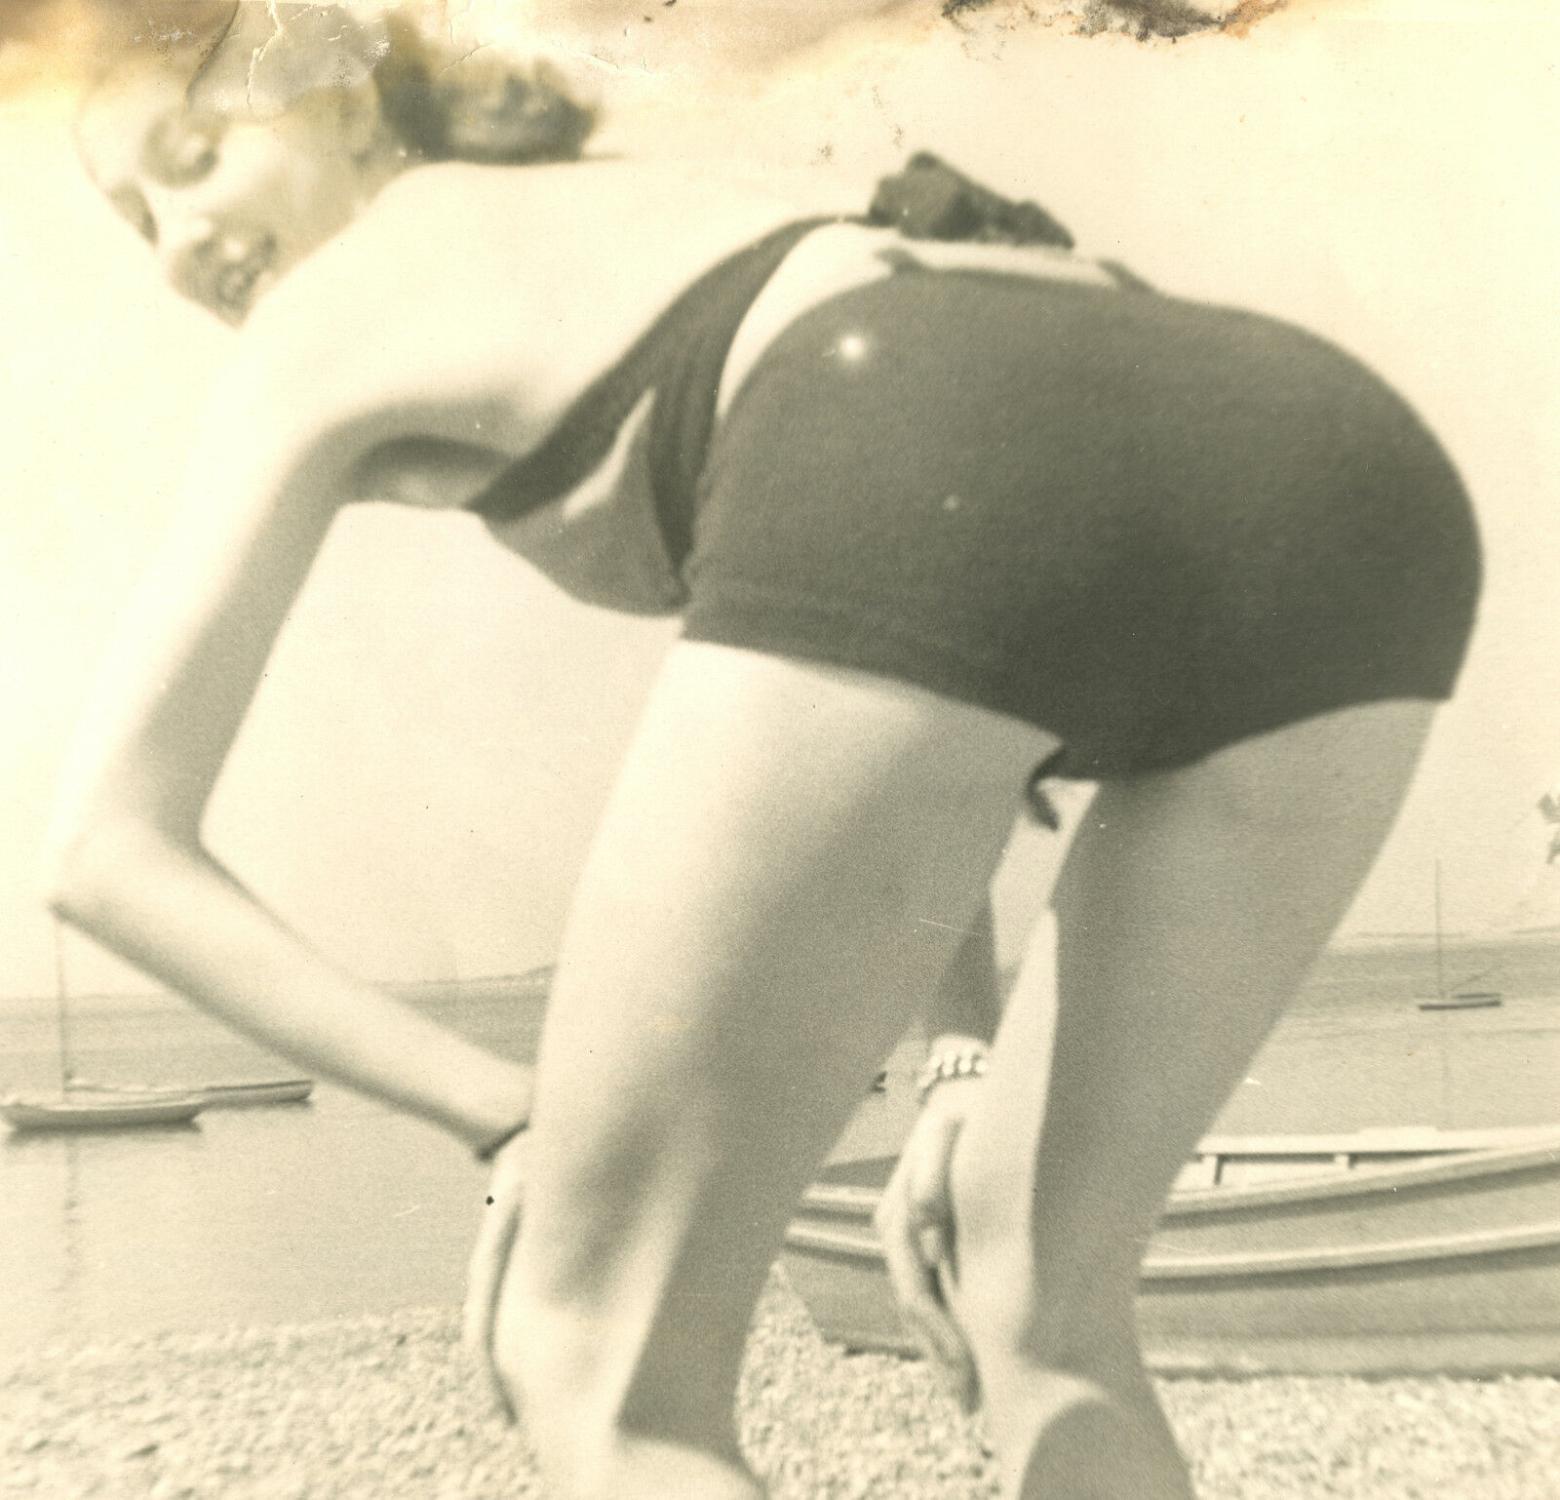 4 x 6 Bathing Beauty 1940s-60s Sepia Butt Repro Risque Pinup Photo Swimsuit 